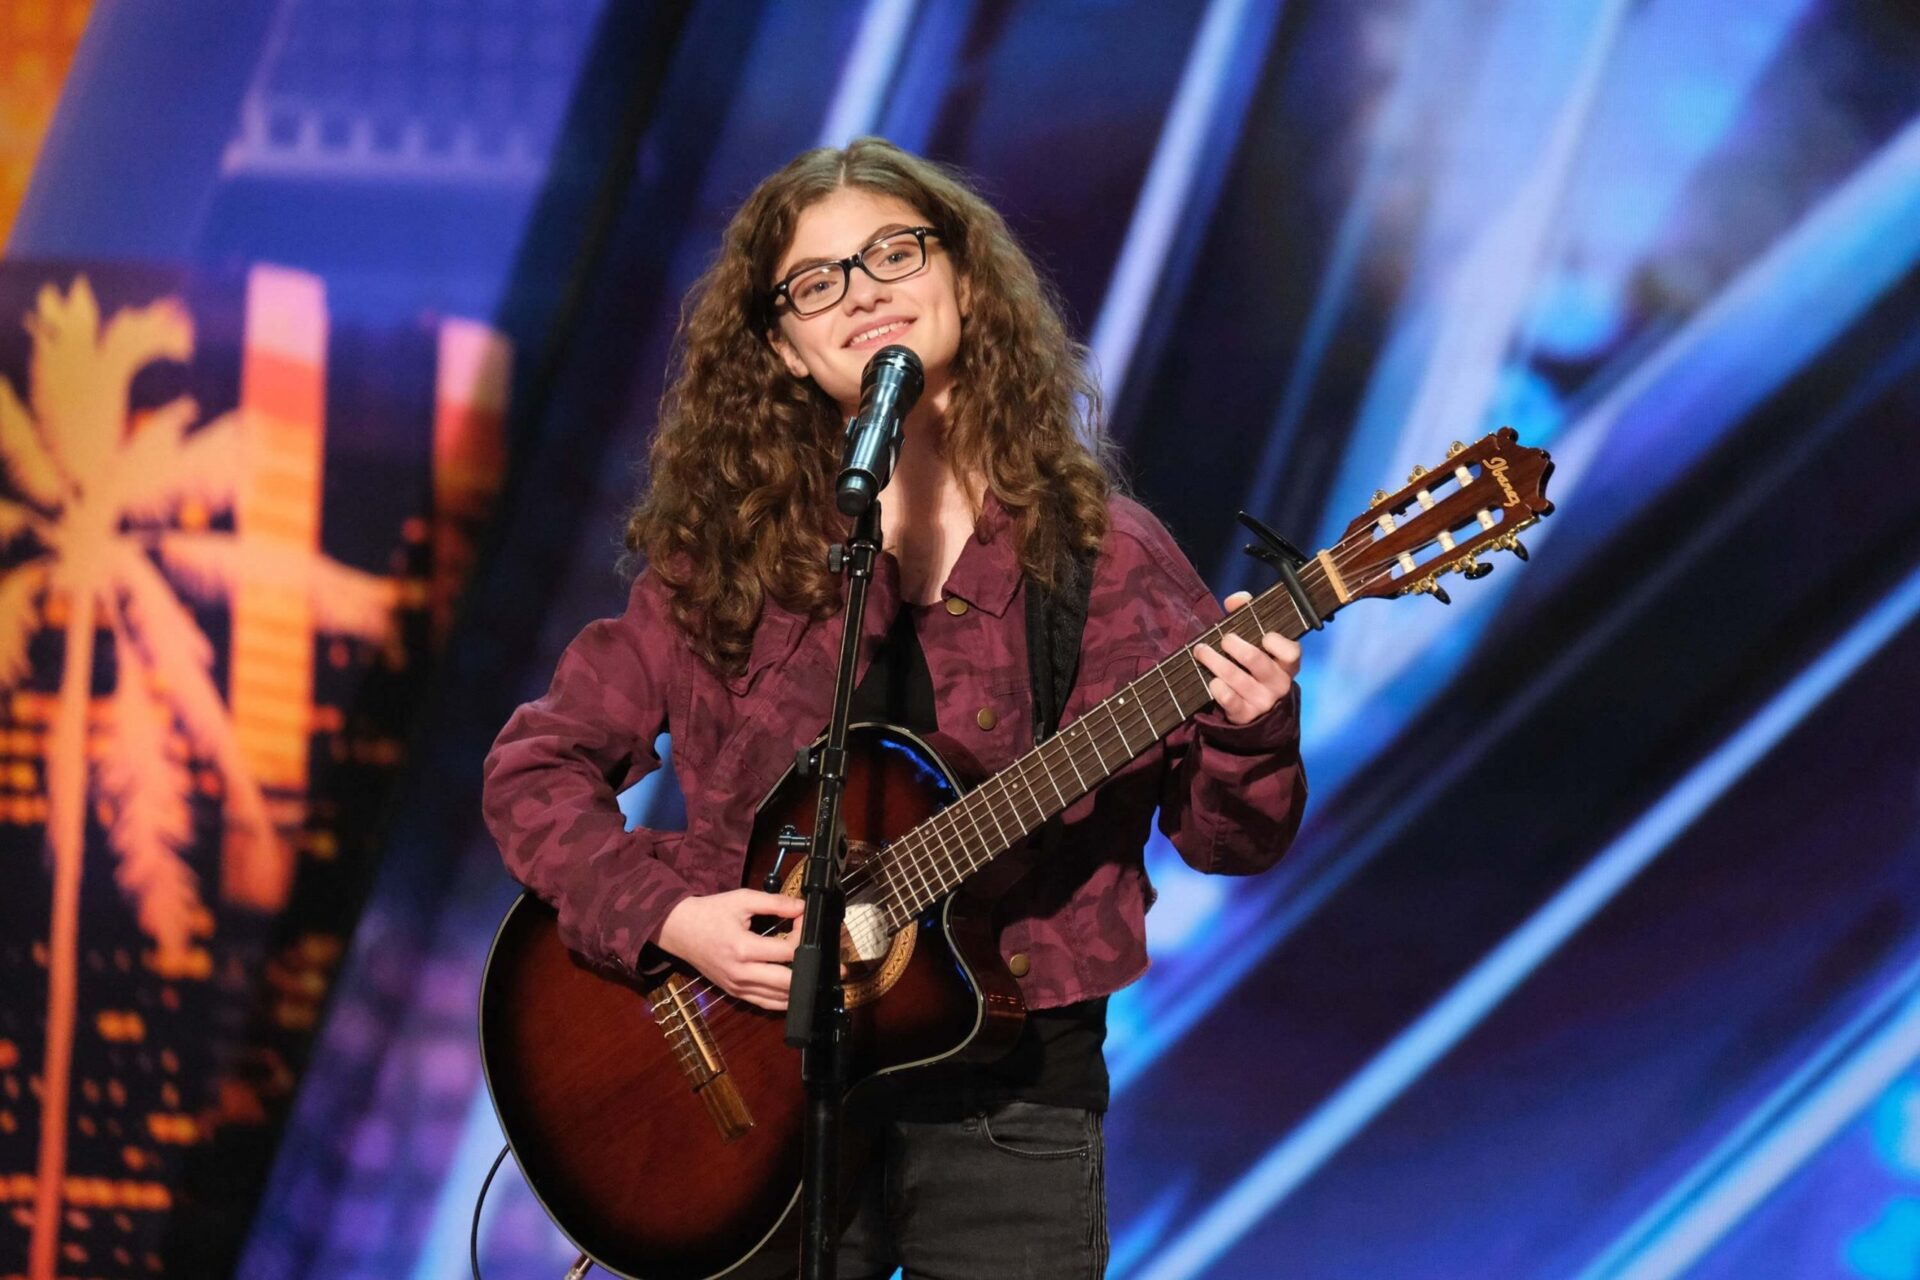 15-Year-Old Raps About Being Bullied On ‘America’s Got Talent’ With Heartbreaking Original Song [VIDEO]